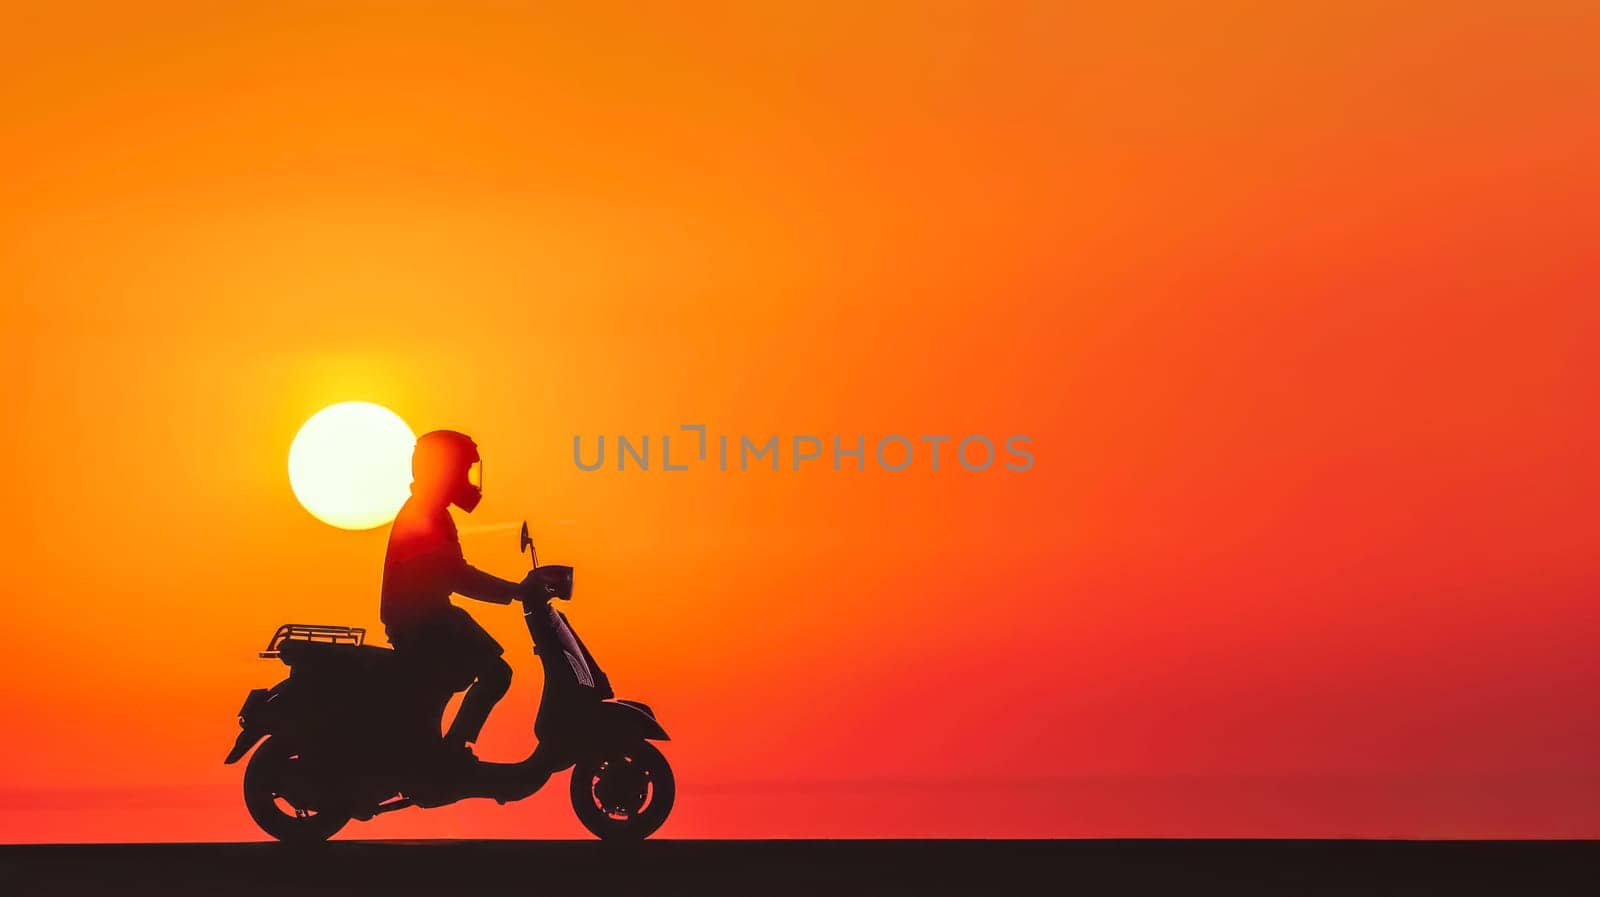 Person rides a scooter against a vibrant orange sunset background by Edophoto